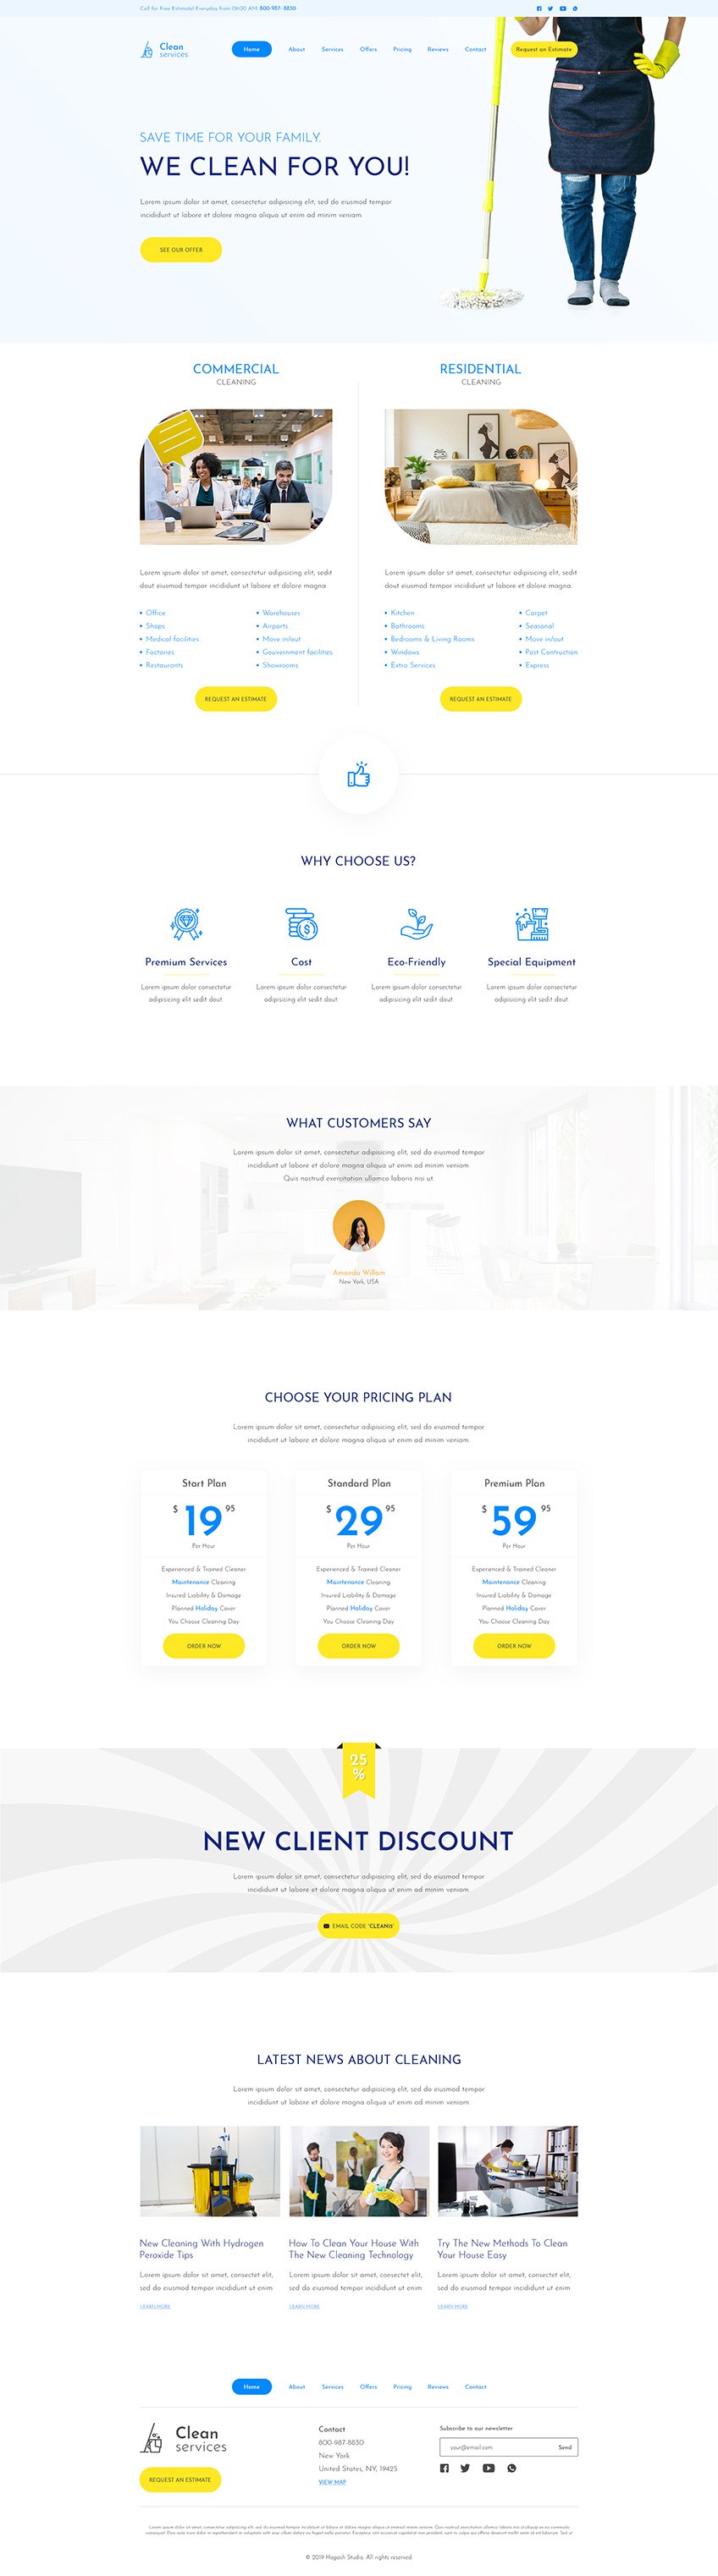 Cleaning Services - Free PSD Template